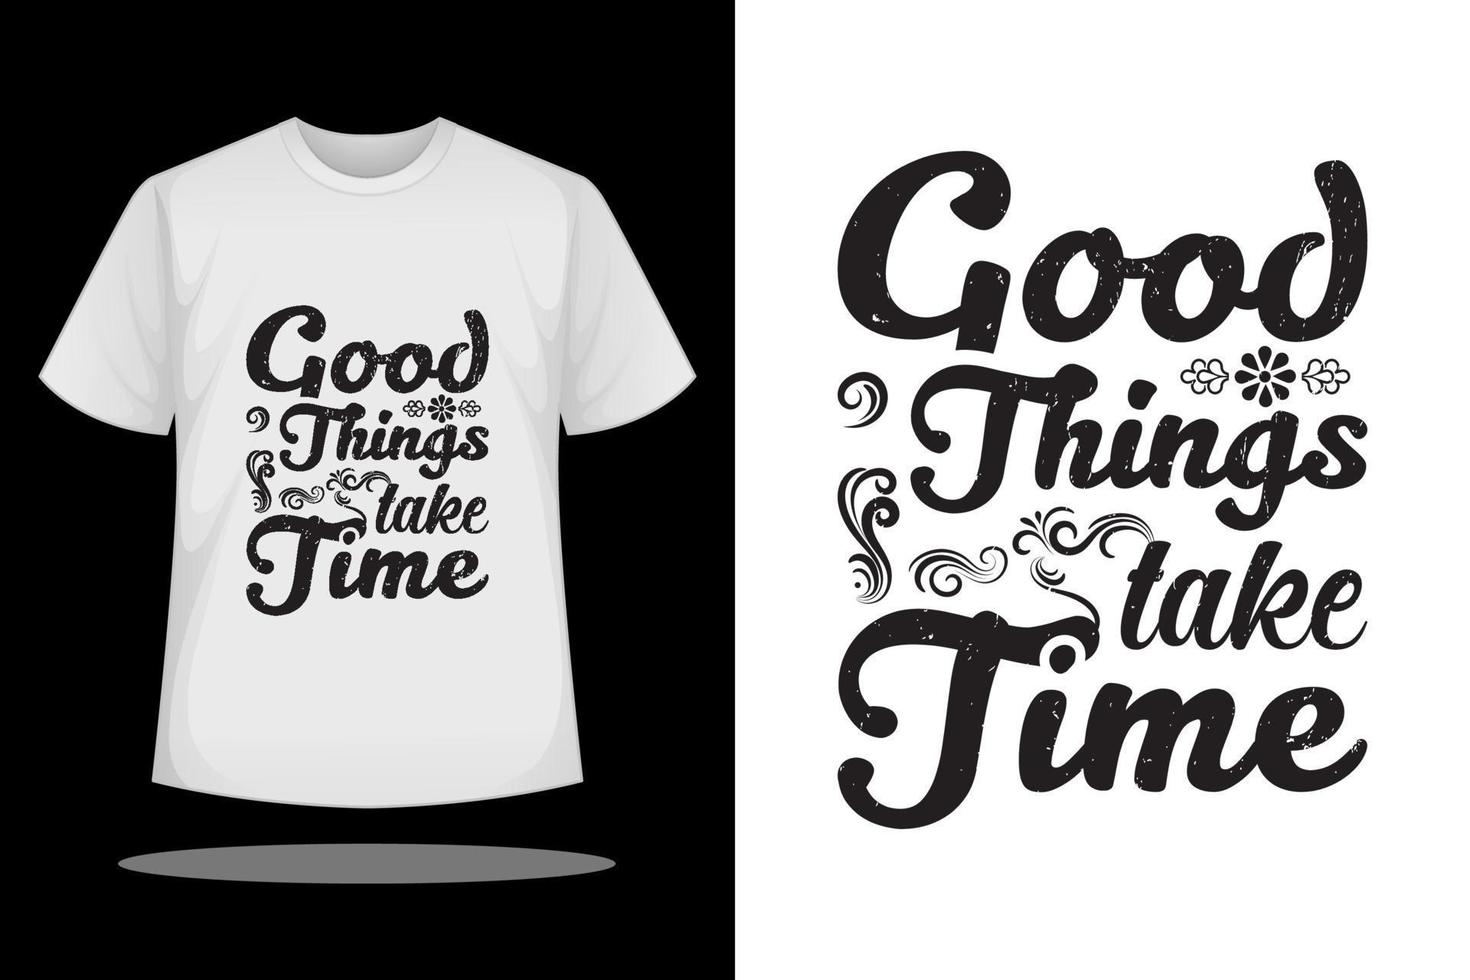 T shirt design, good things take time inspirational quote and slogan graphic t shirt vector